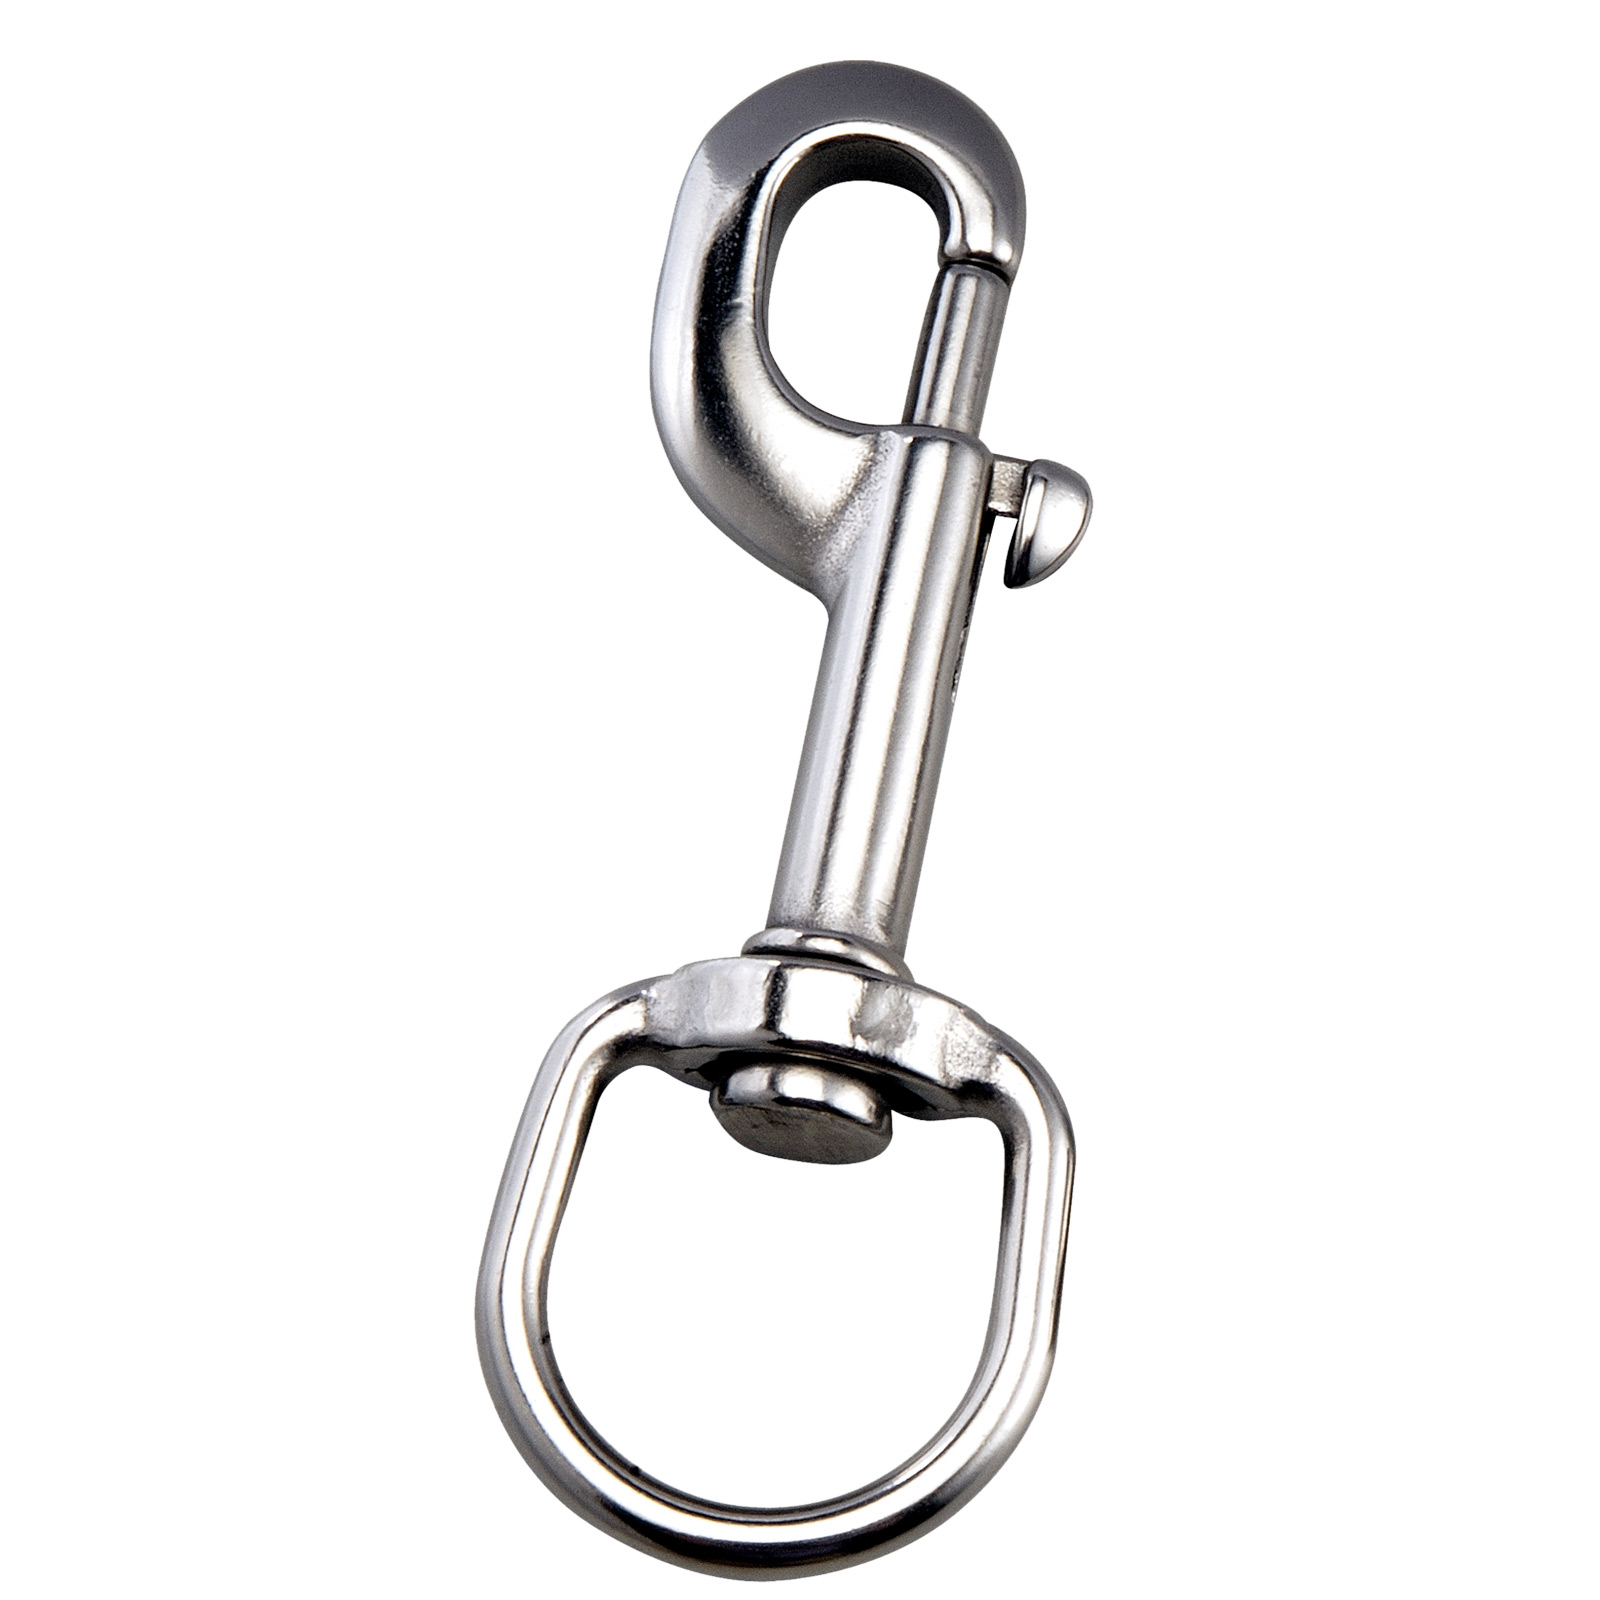 Big Stainless Steel Clip